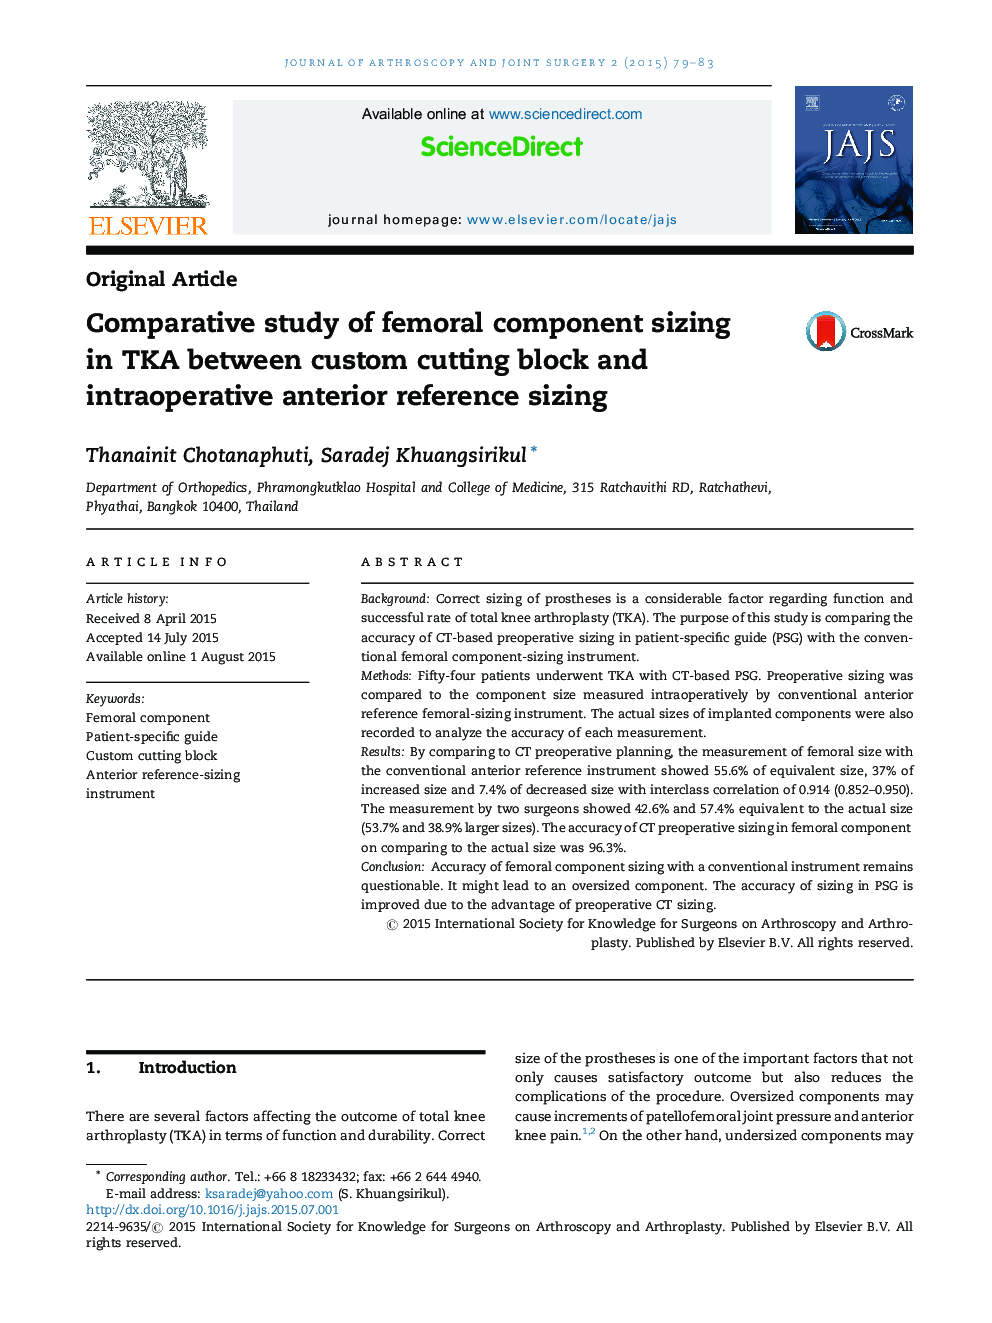 Comparative study of femoral component sizing in TKA between custom cutting block and intraoperative anterior reference sizing